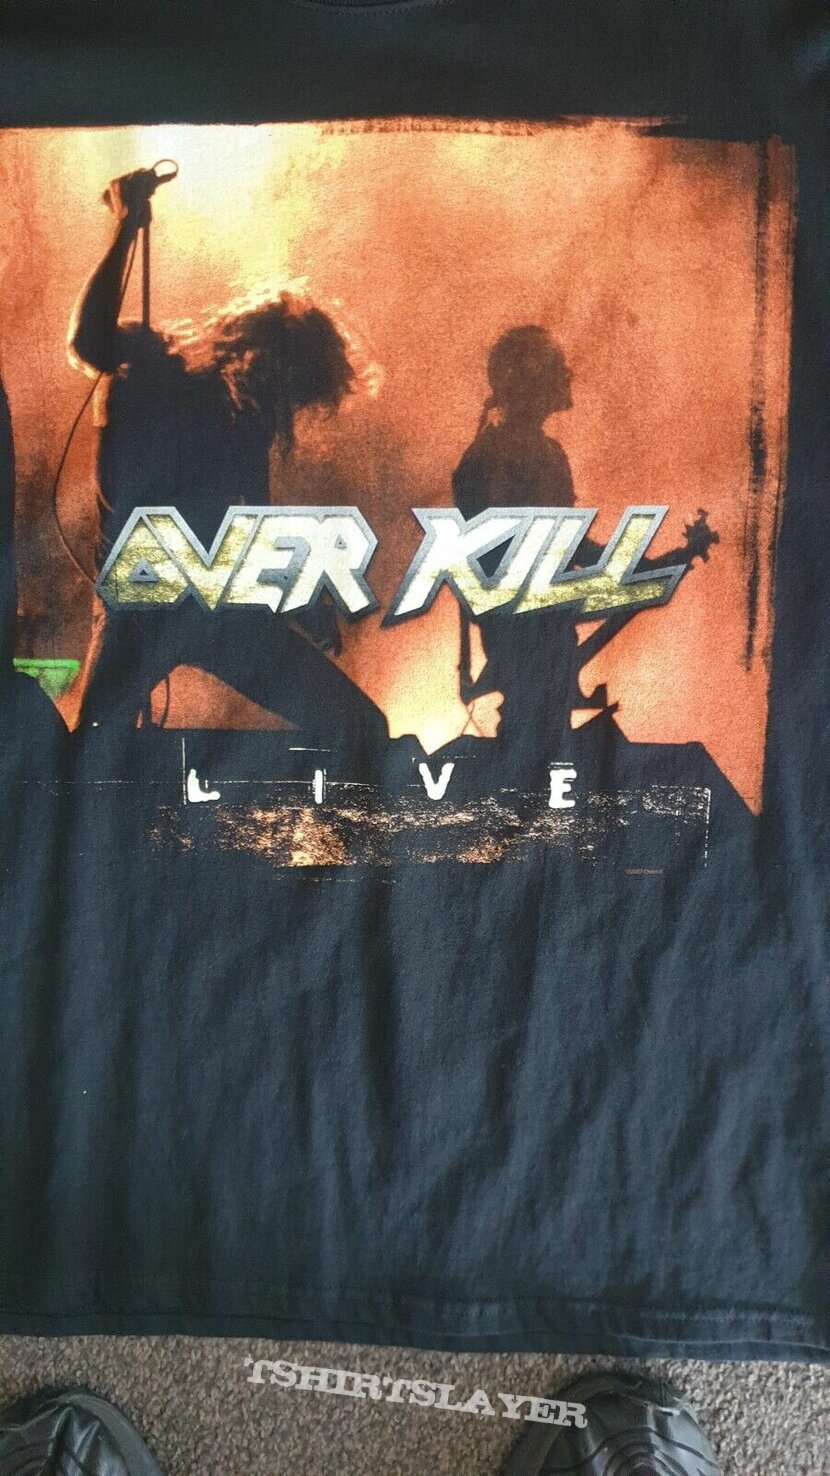 OVERKILL wrecking everything live T SHIRT 2002